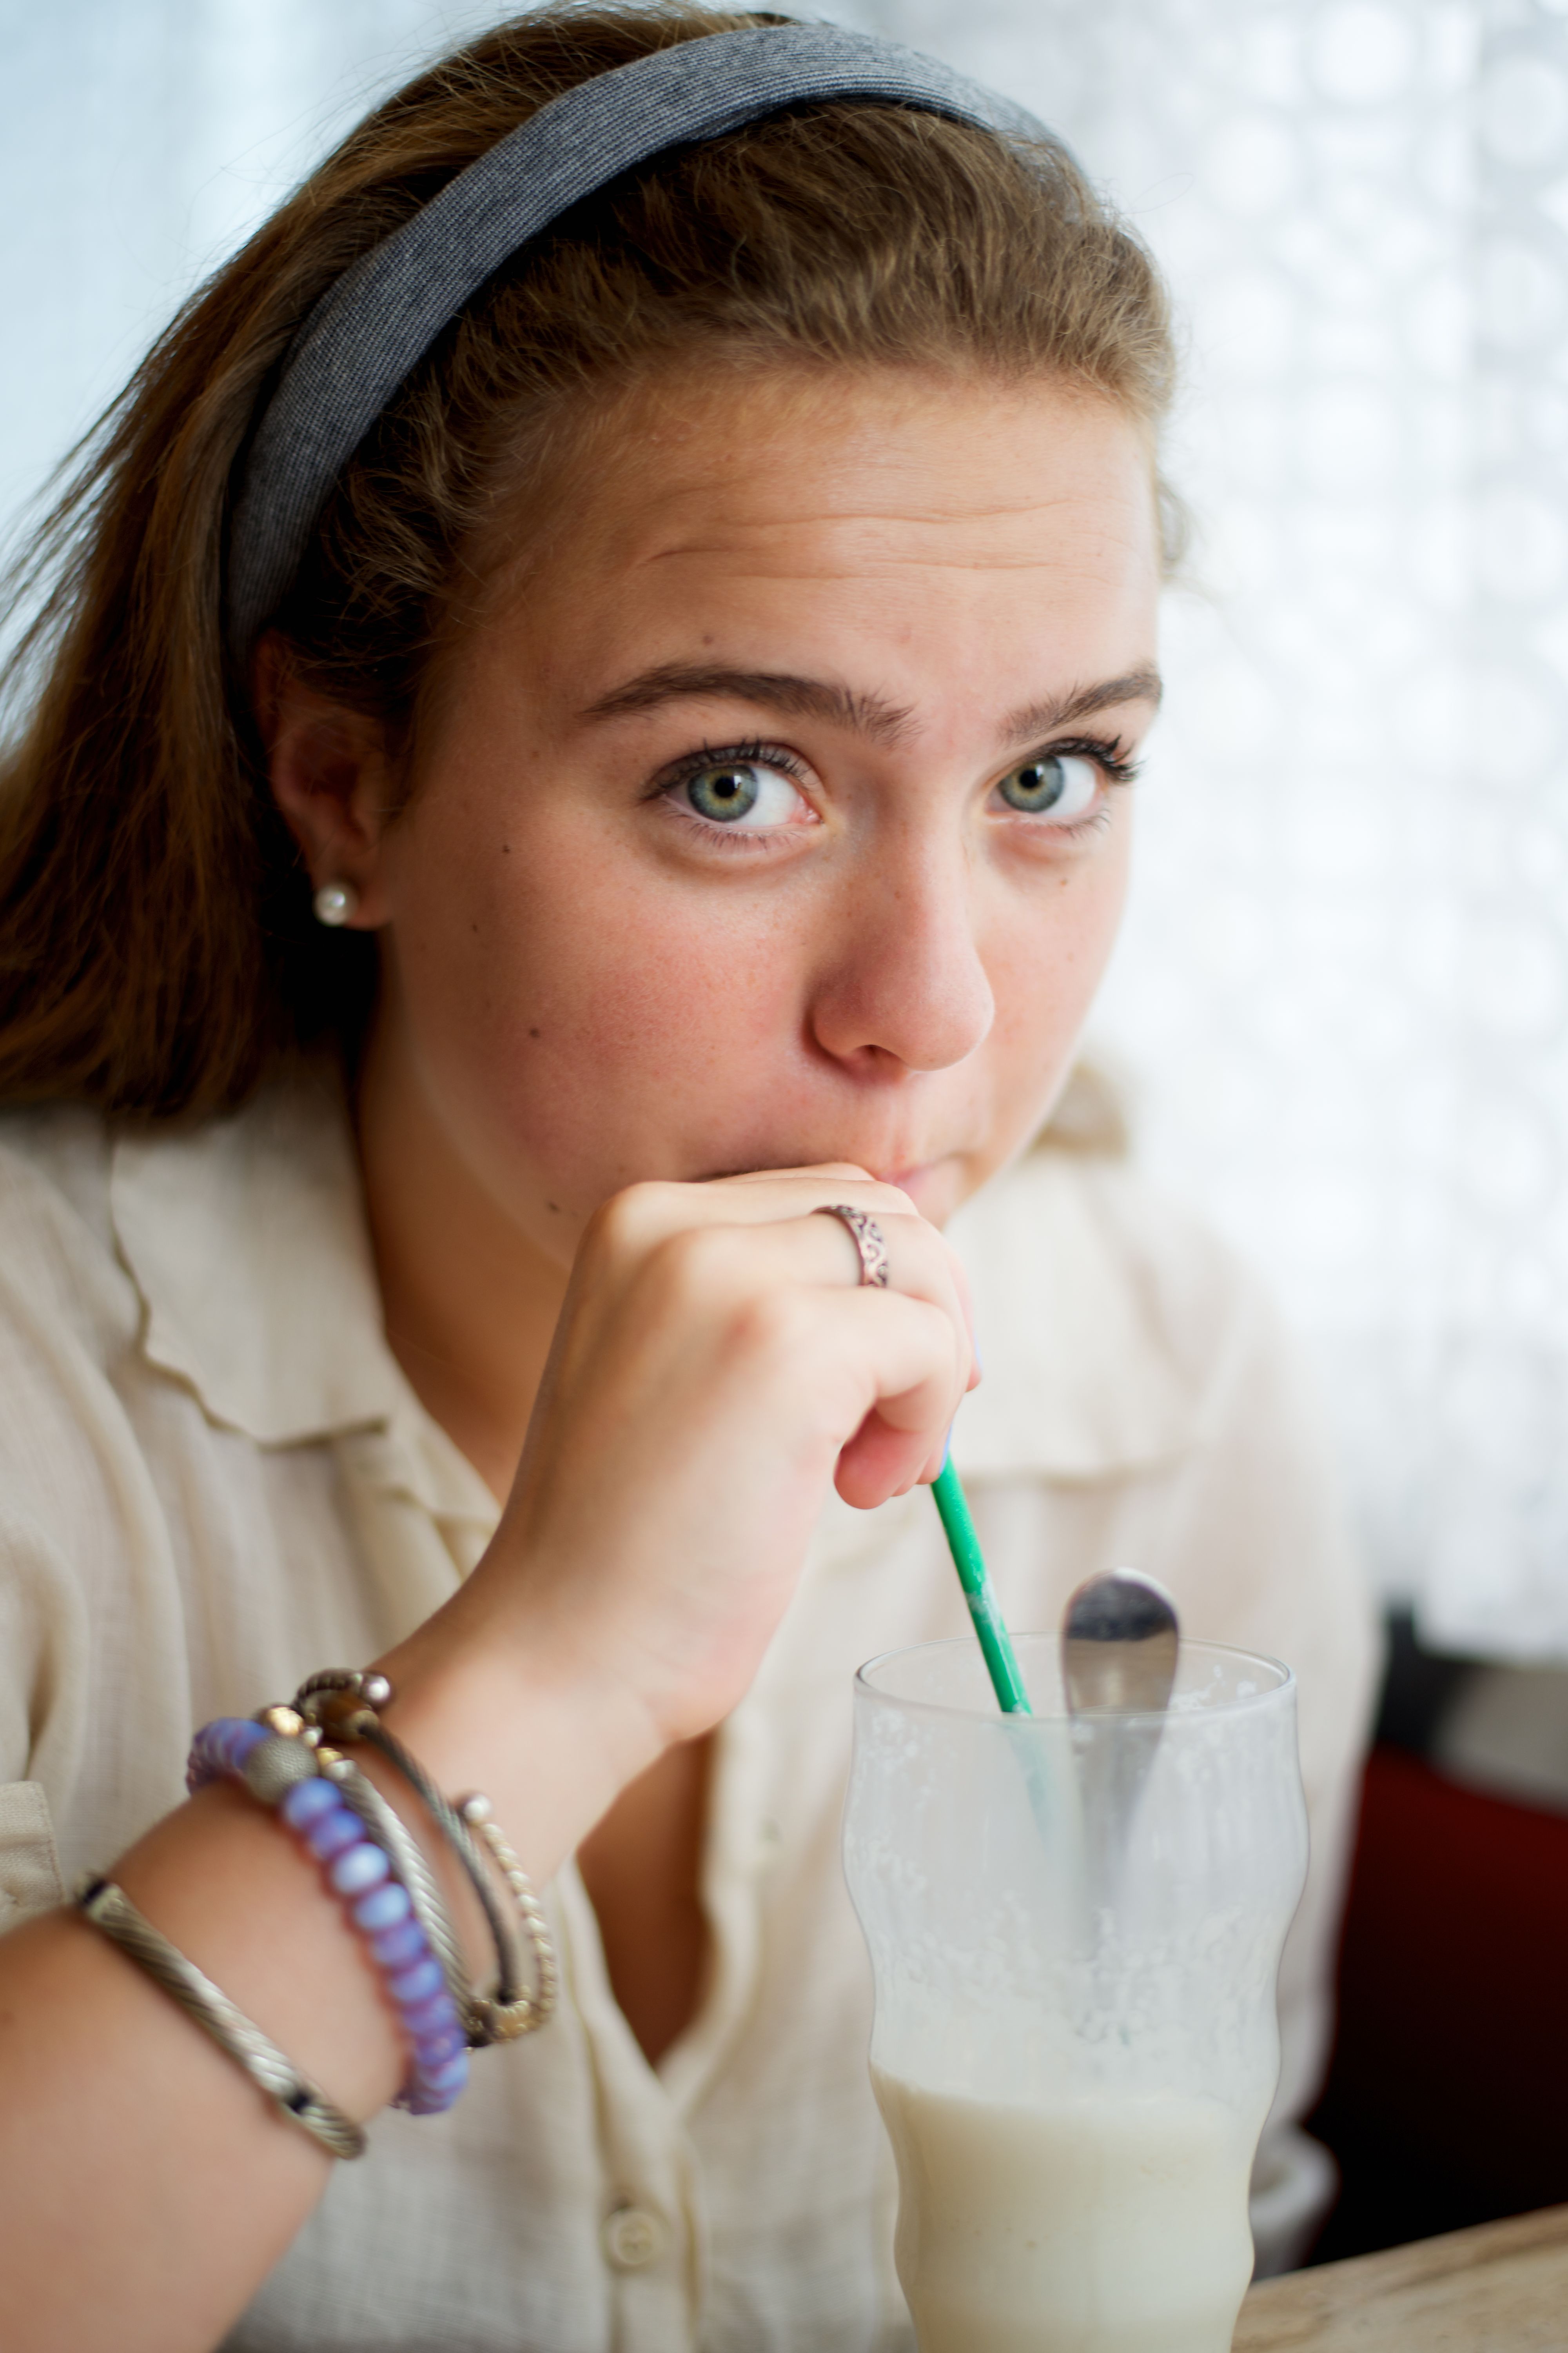 Young woman with hair band and bracelets enjoys milkshake